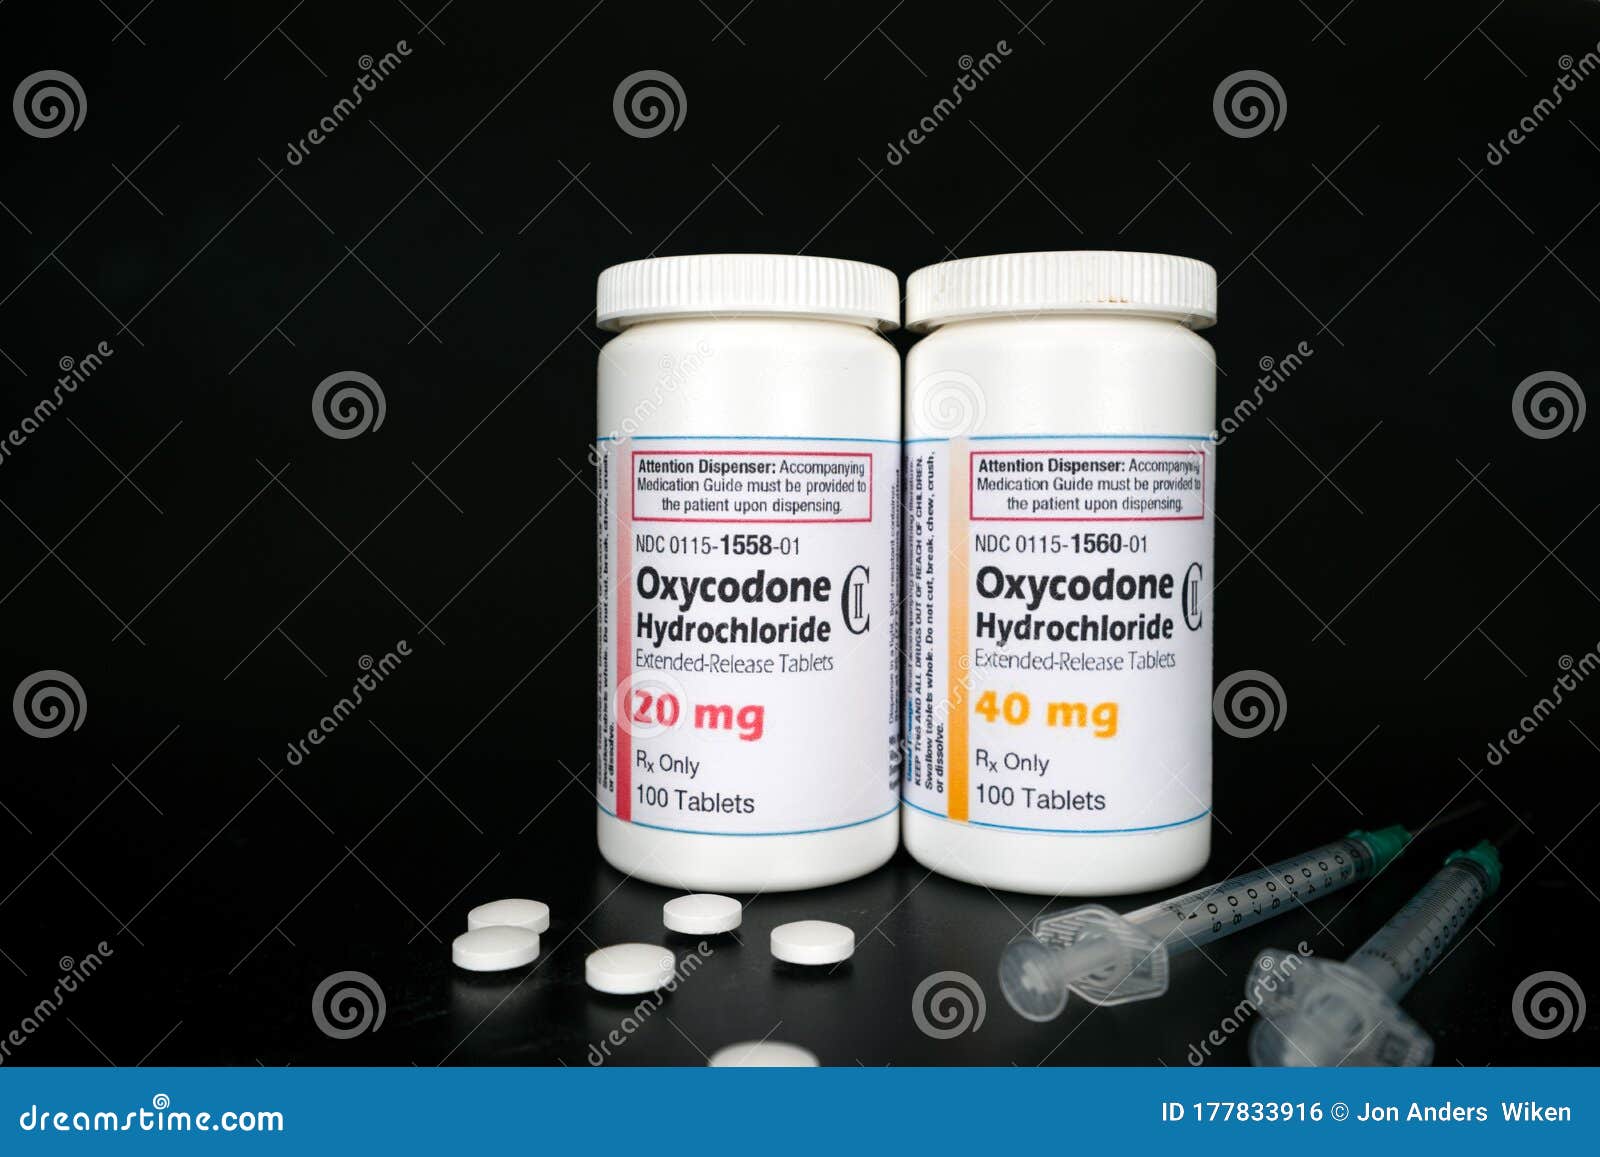 what is hydrochloride prescribed for